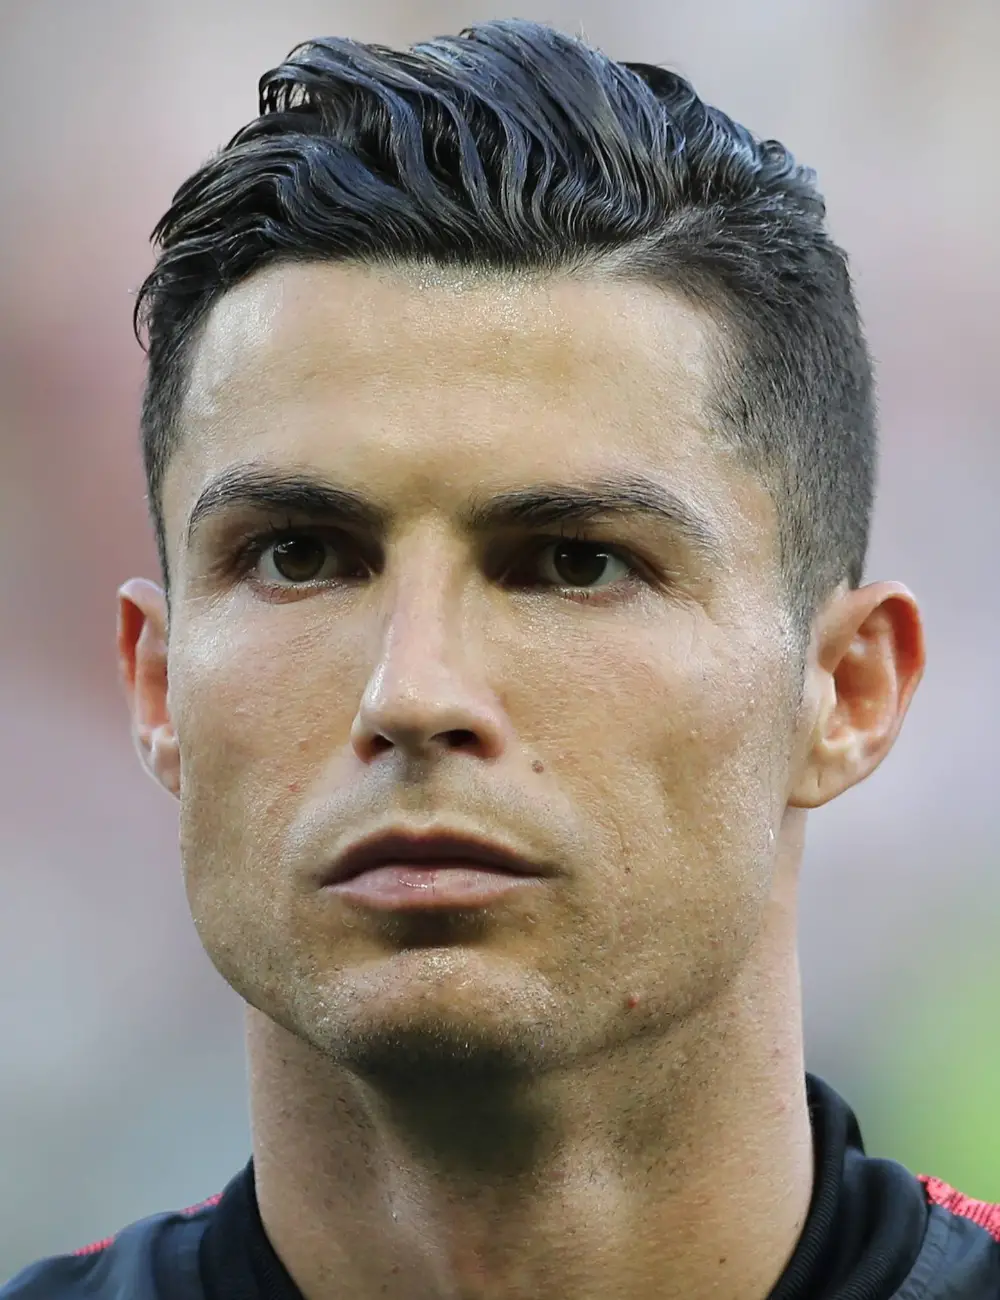 50-classic-side-part-haircuts-for-men-trending-this-year The Cristiano Ronaldo